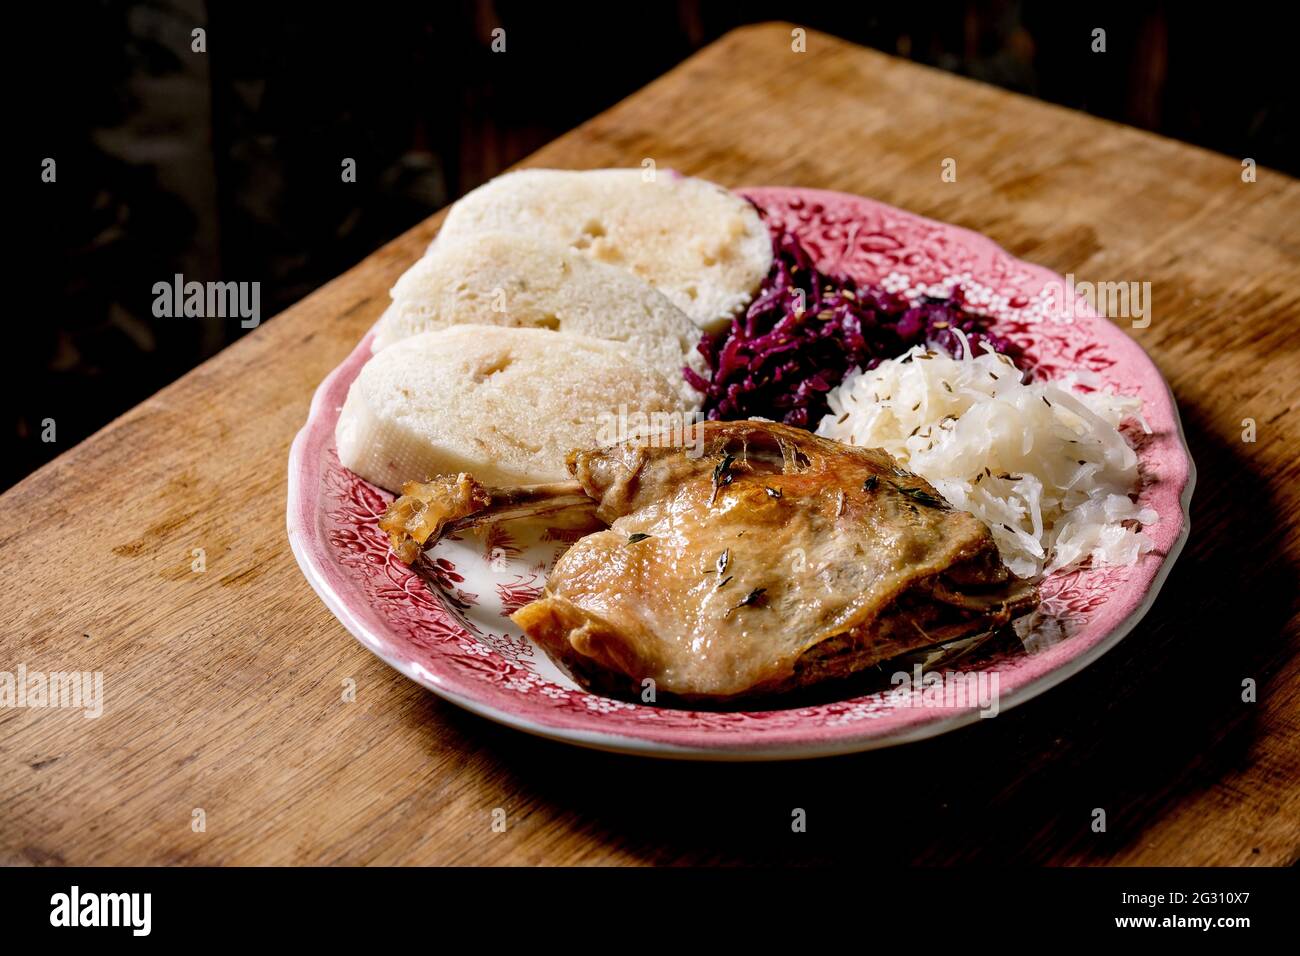 Baked duck legs with sliced boiled bread knedliks and sauerkraut in ceramic plate over brown wooden table. Traditional Czech, German and european cuis Stock Photo